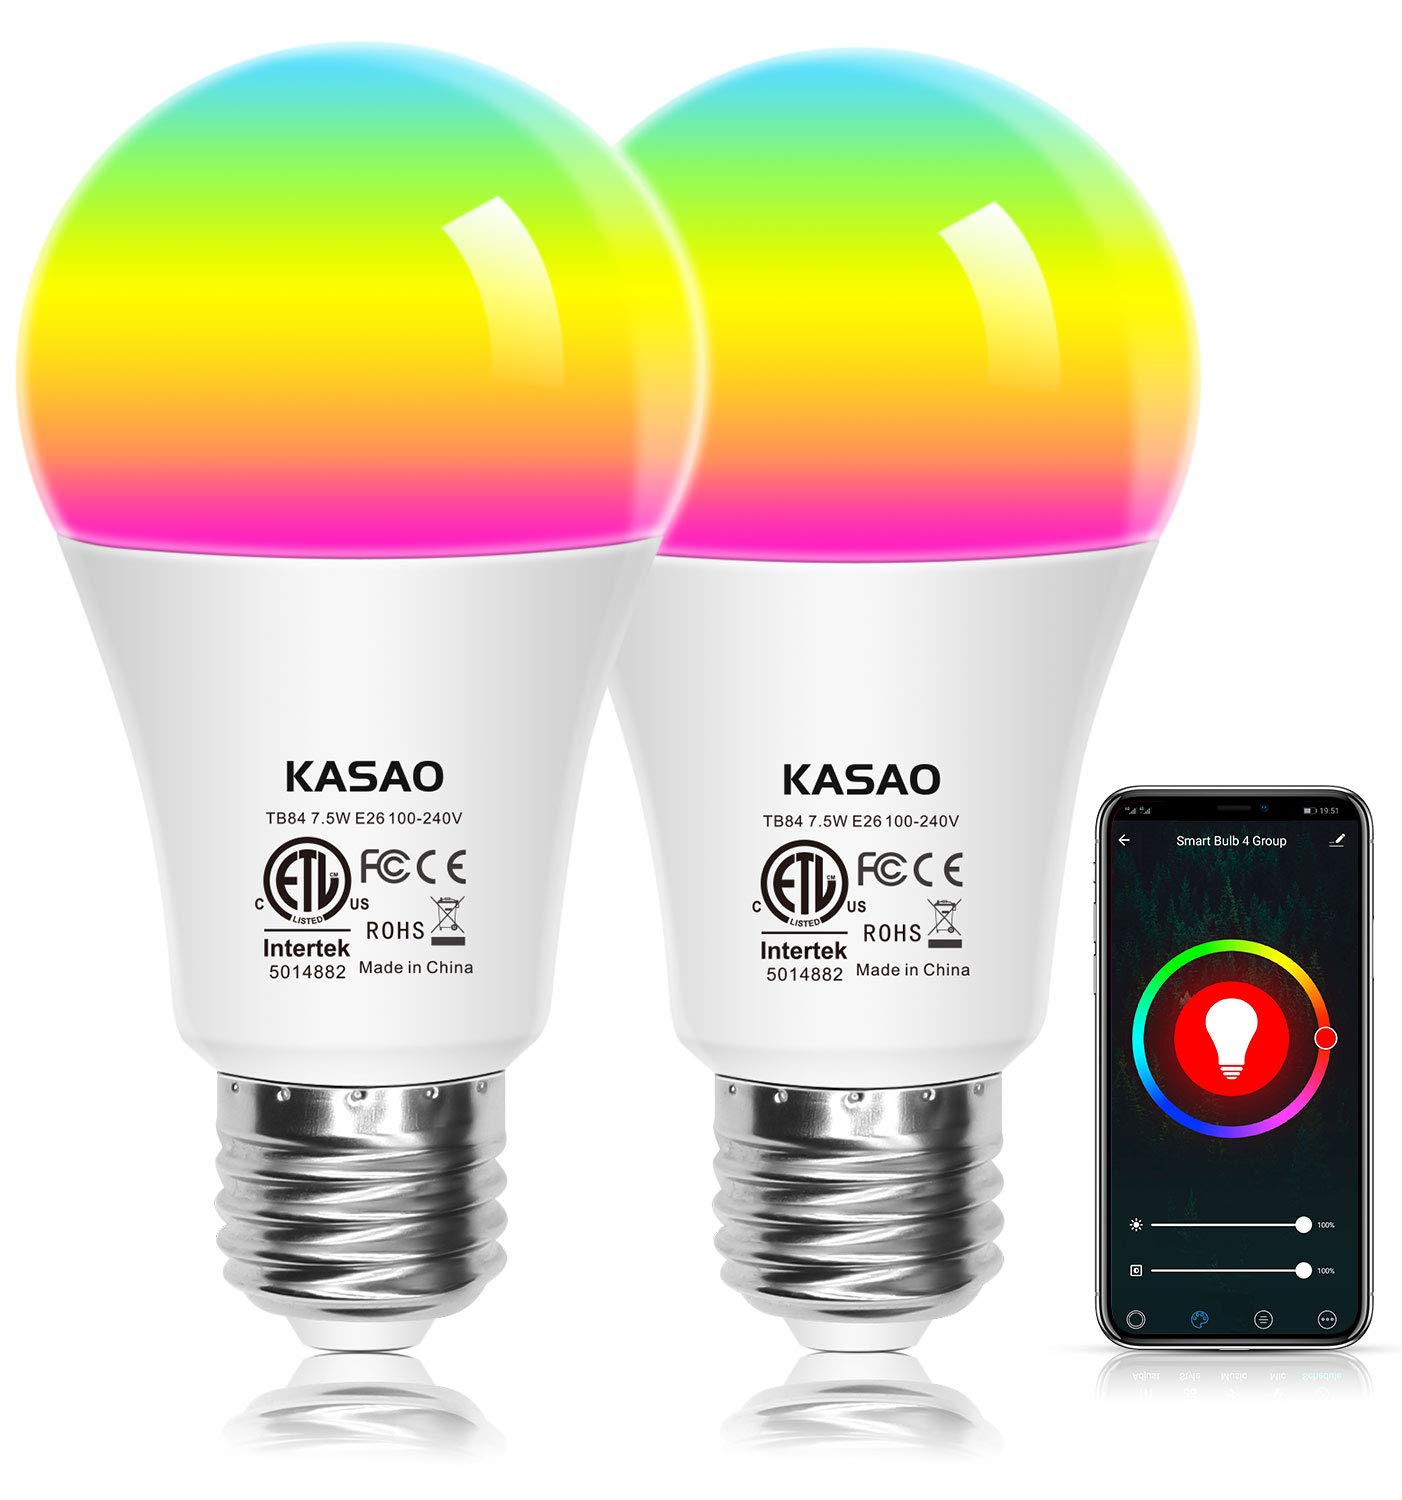 Book Cover WiFi Smart LED Light Bulbs, A19 E26 RGB+W Color Changing Light Bulb Compatible with Alexa, Google Home Assistant and IFTTT + APP Control No Hub Required 7.5W (60W Equivalent)-2 Pack